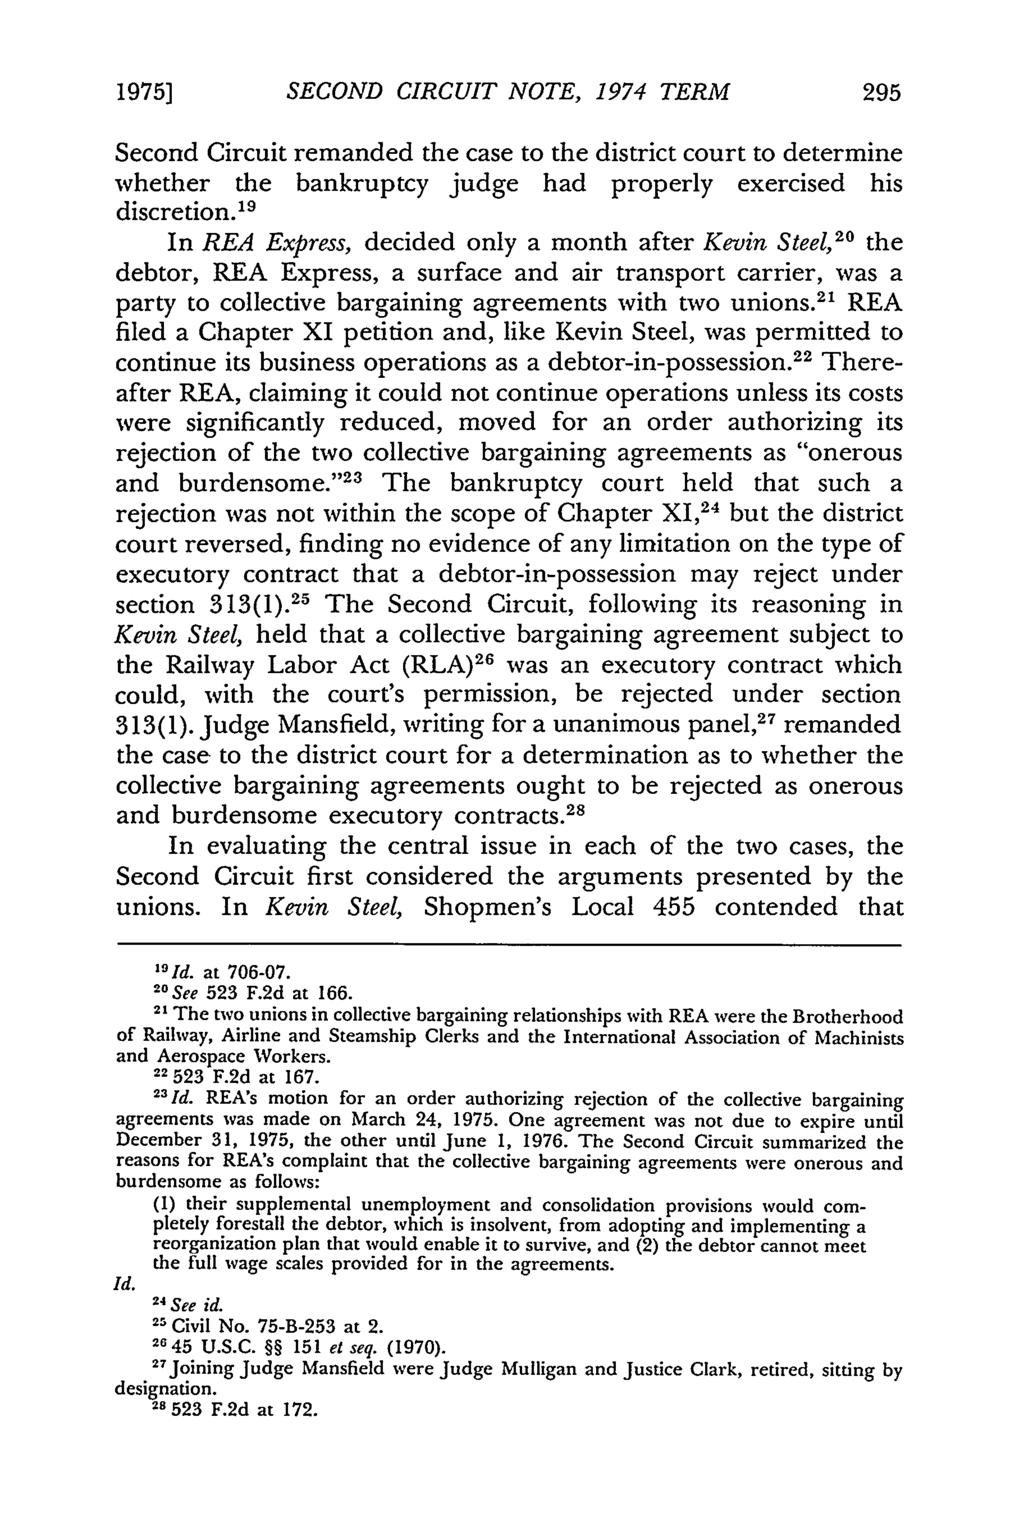 1975] SECOND CIRCUIT NOTE, 1974 TERM Second Circuit remanded the case to the district court to determine whether the bankruptcy judge had properly exercised his discretion.